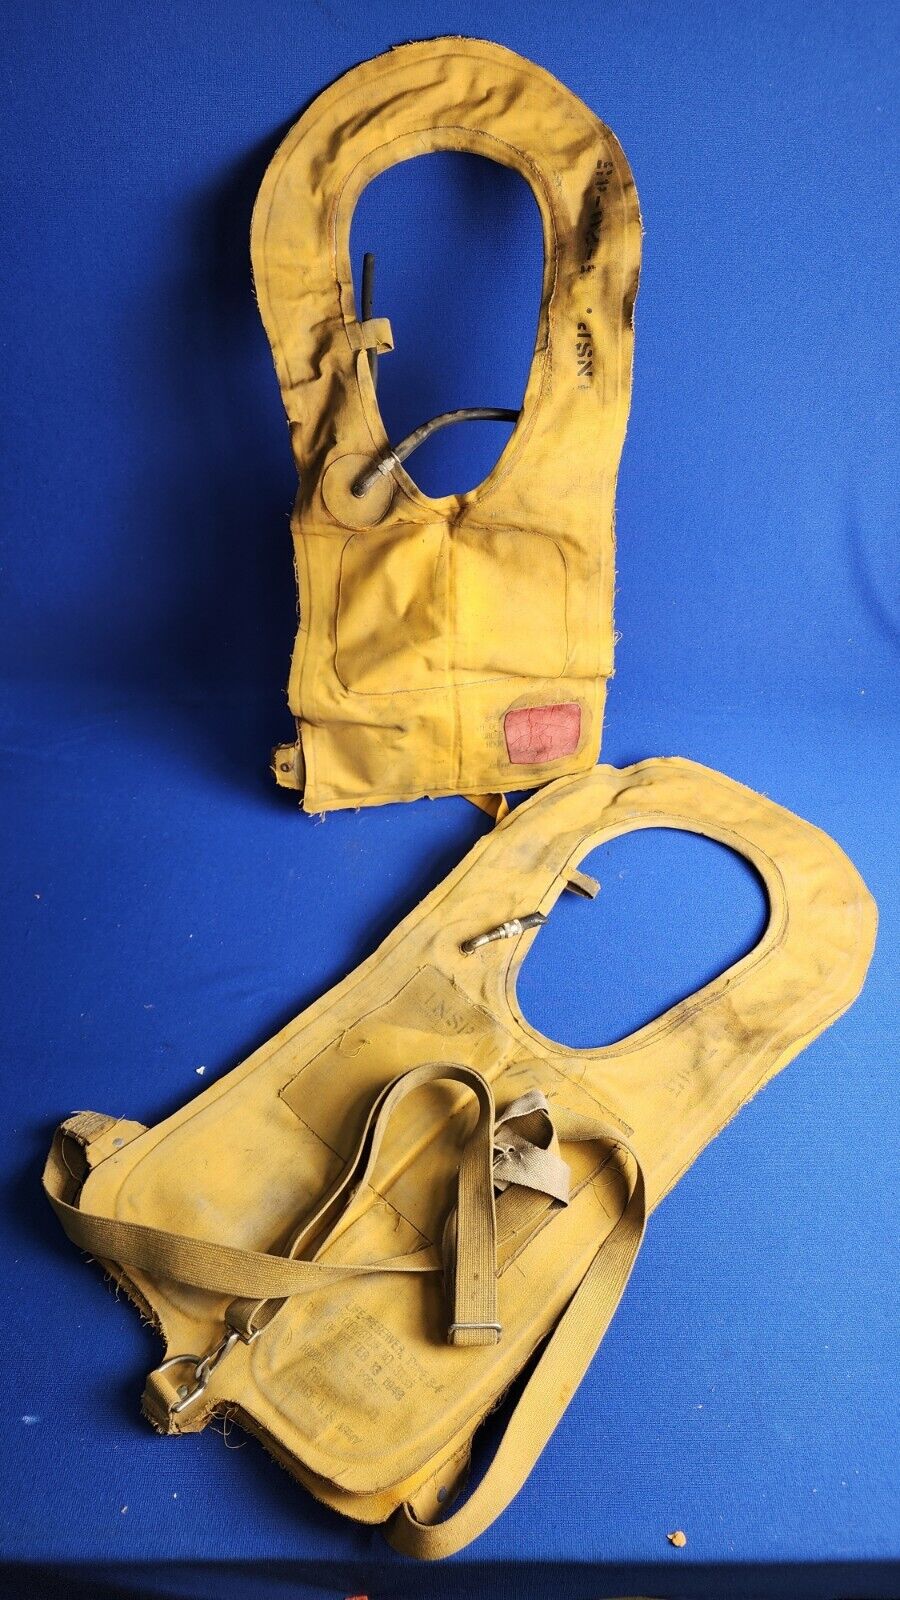 Lot of 2 WWII US Army Air Force Vest Life Preserver Jacket WW2 Vintage Military